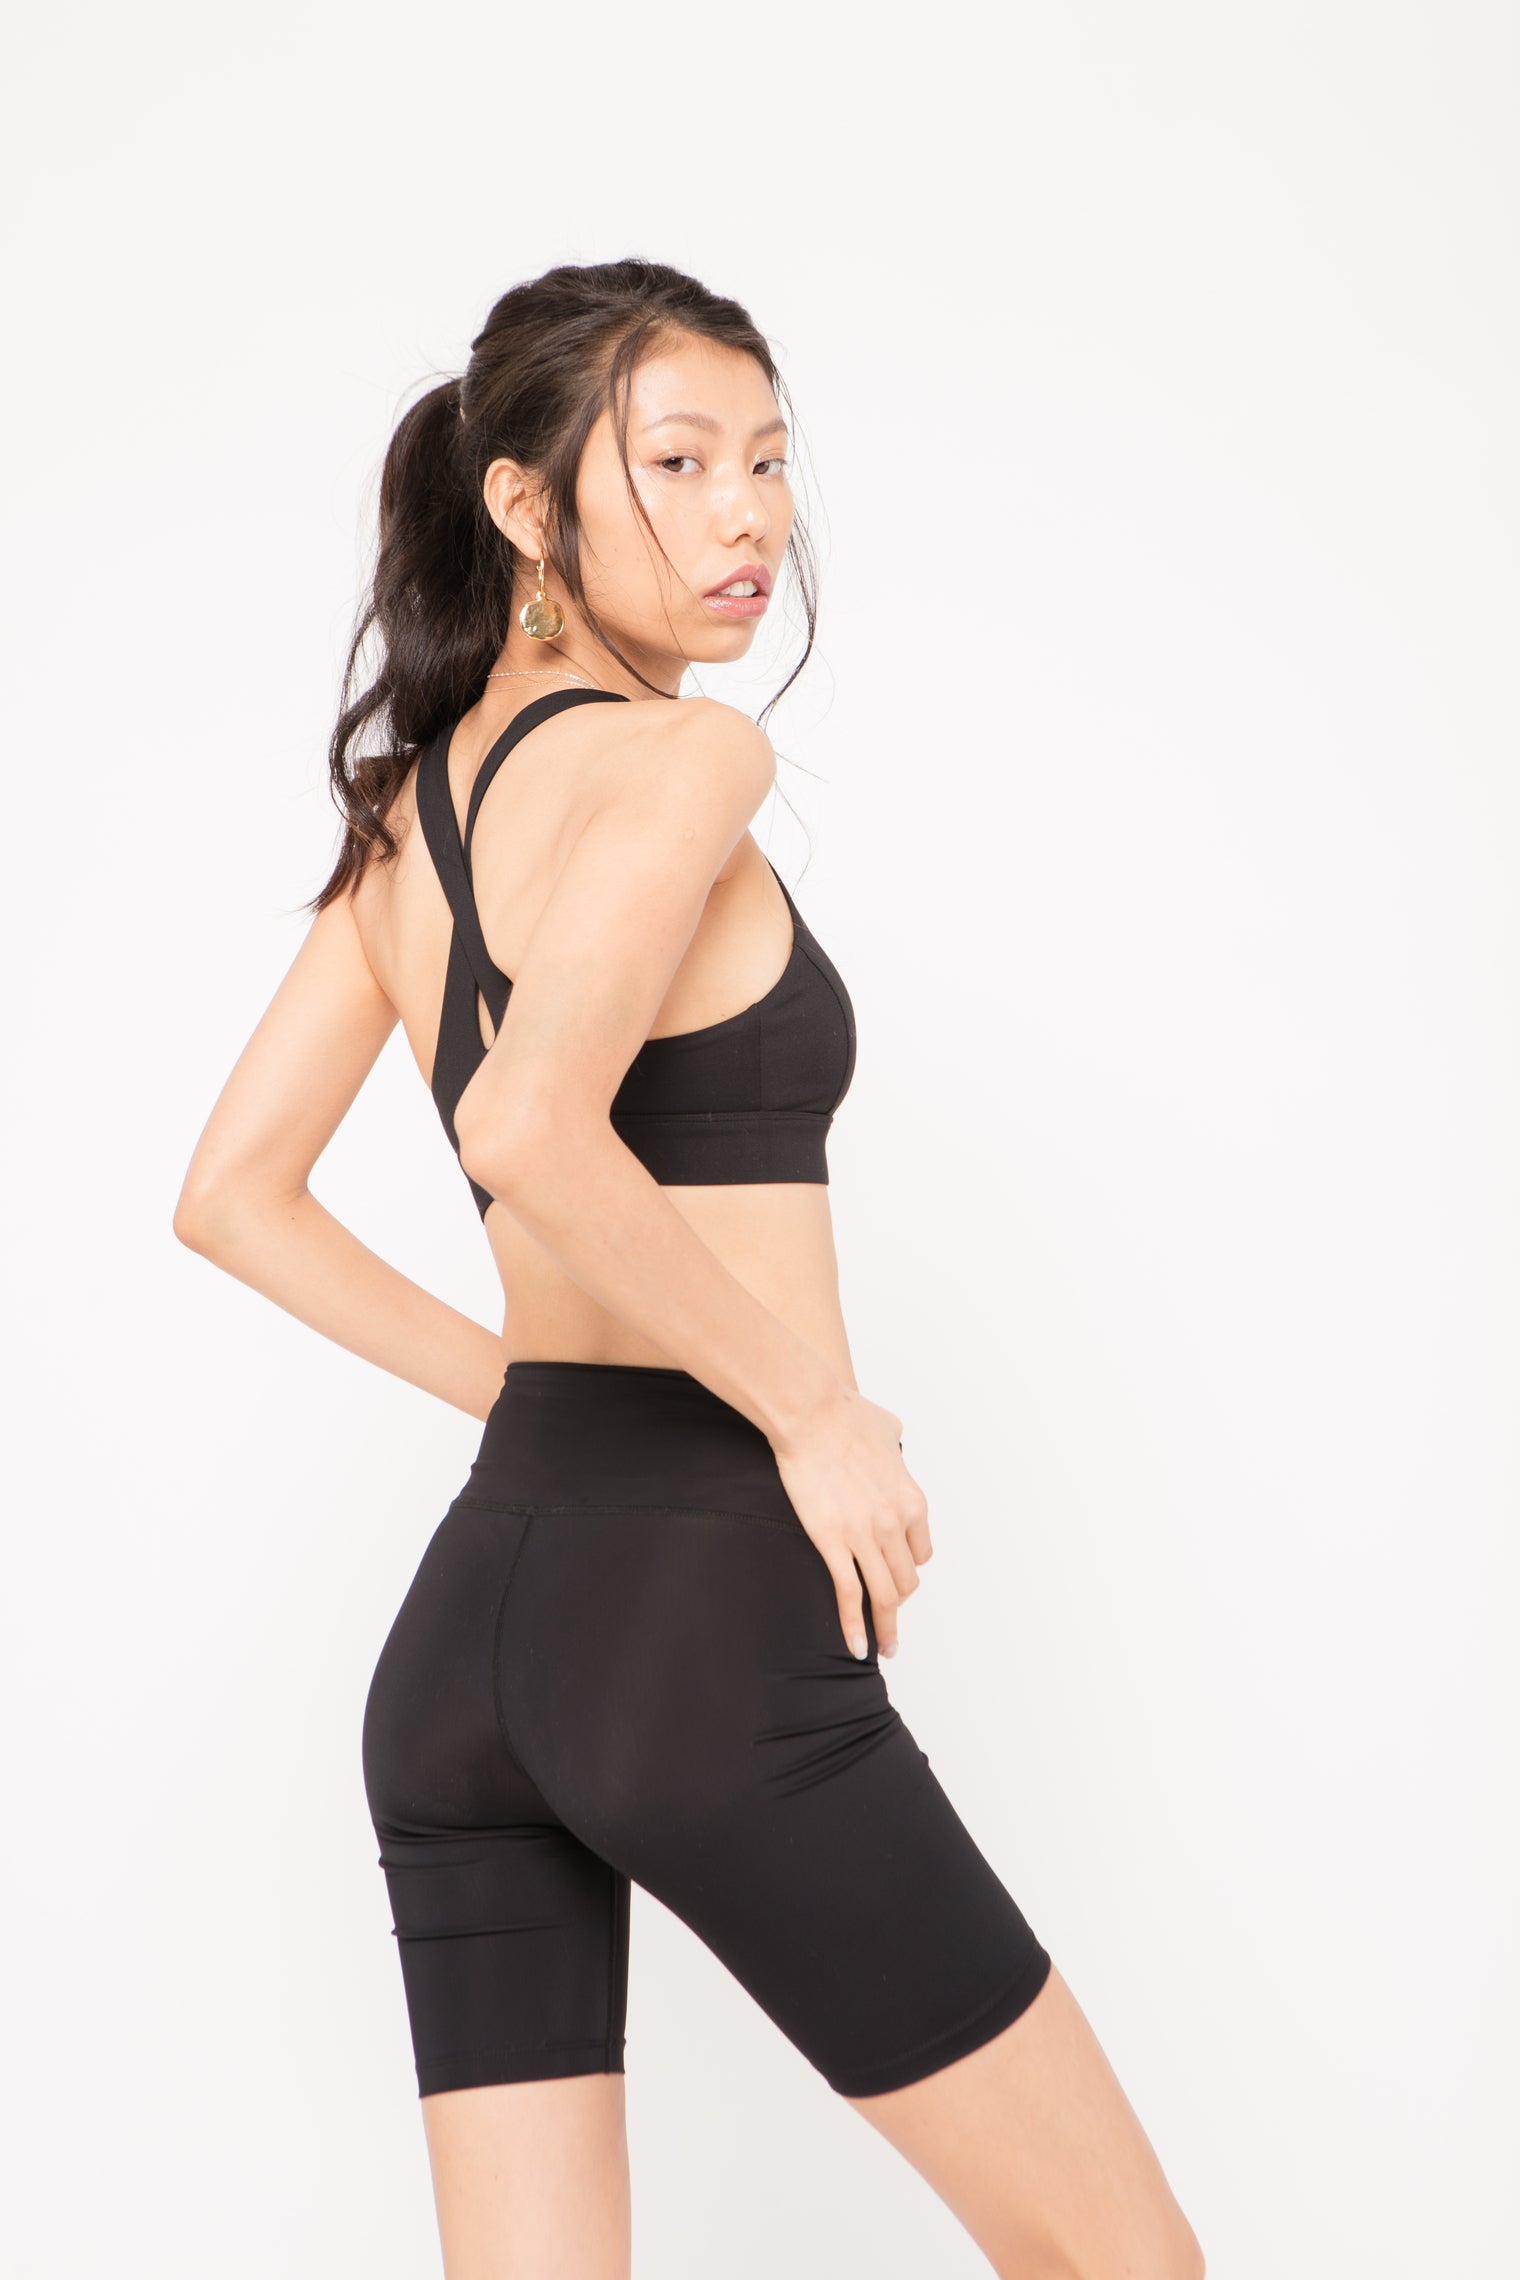 SAYA THE LABEL - honest and timeless women's athleisure – SAYA the